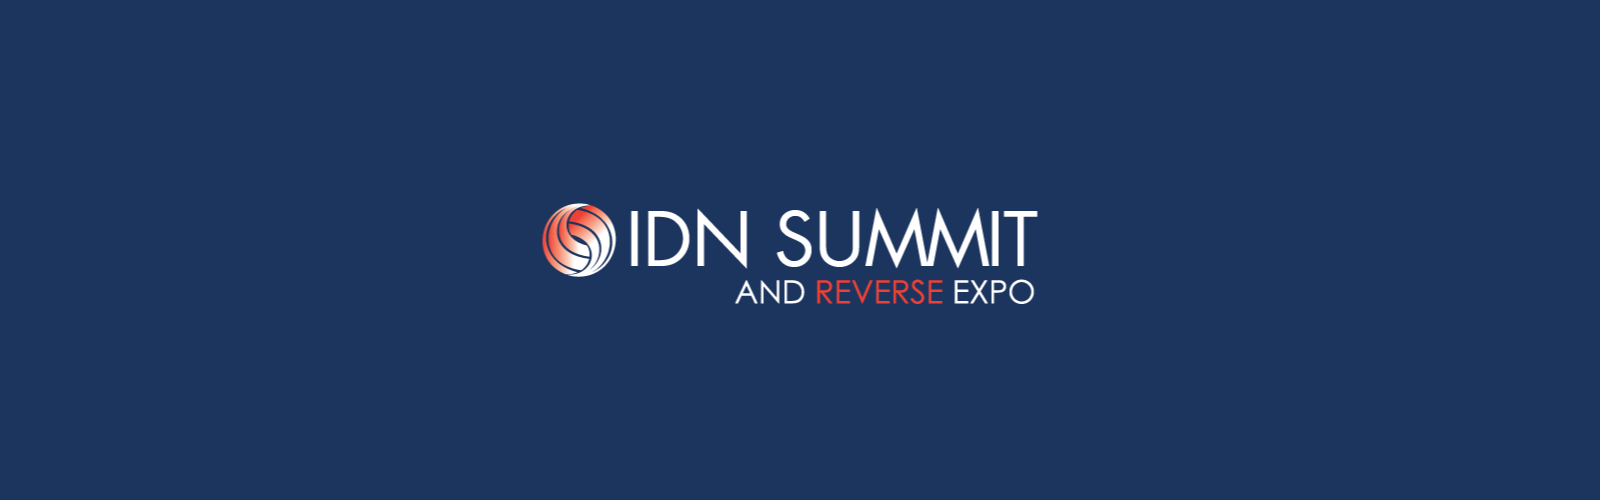 IDN Summit and Reverse Expo